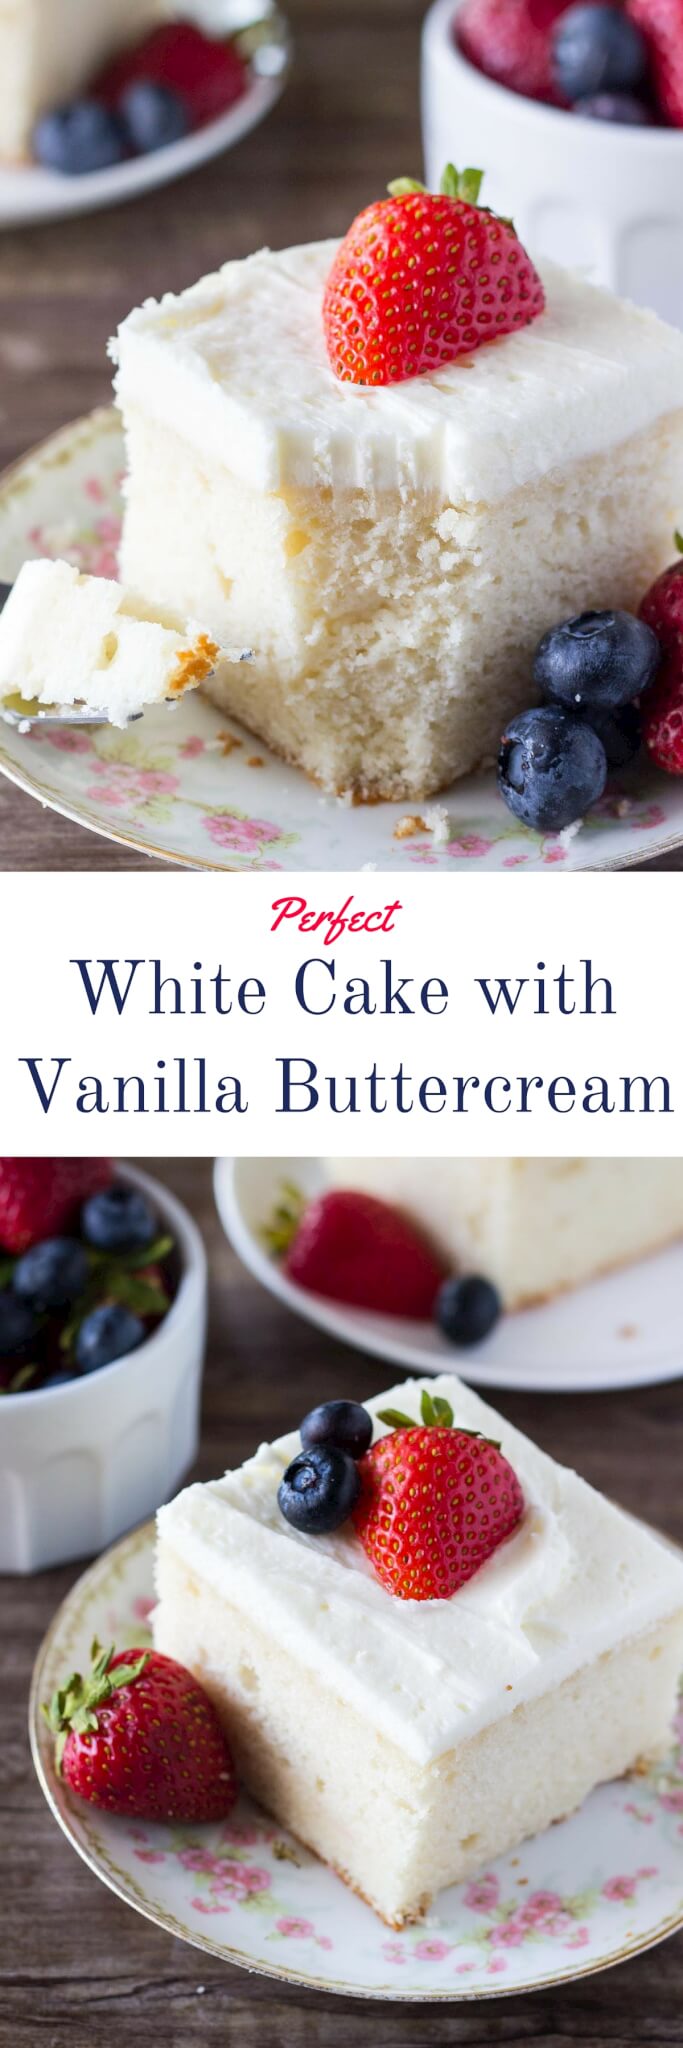 Fluffy, perfectly moist White Cake with Vanilla Buttercream. Perfect for a crowd & so much better than the bakery! Make it for your next birthday, anniversary or family celebration!